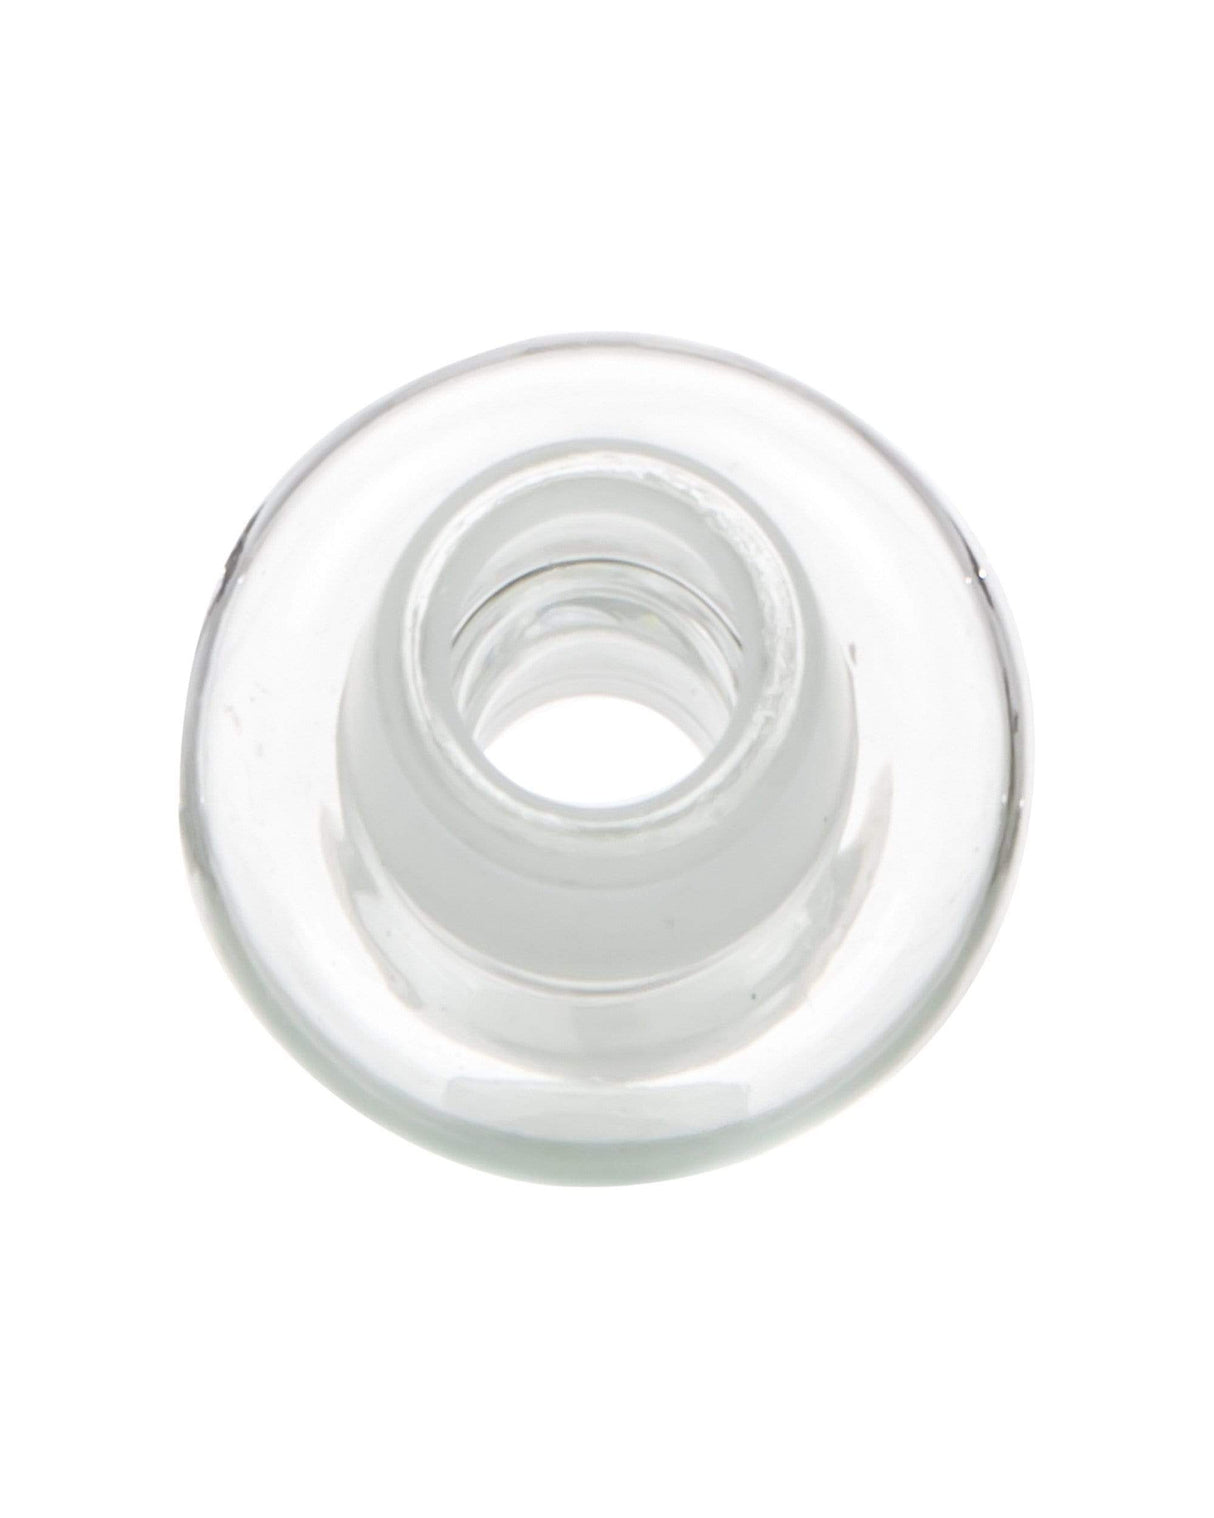 Valiant Distribution clear glass joint converter, 90-degree angle, 14mm male to male, top view